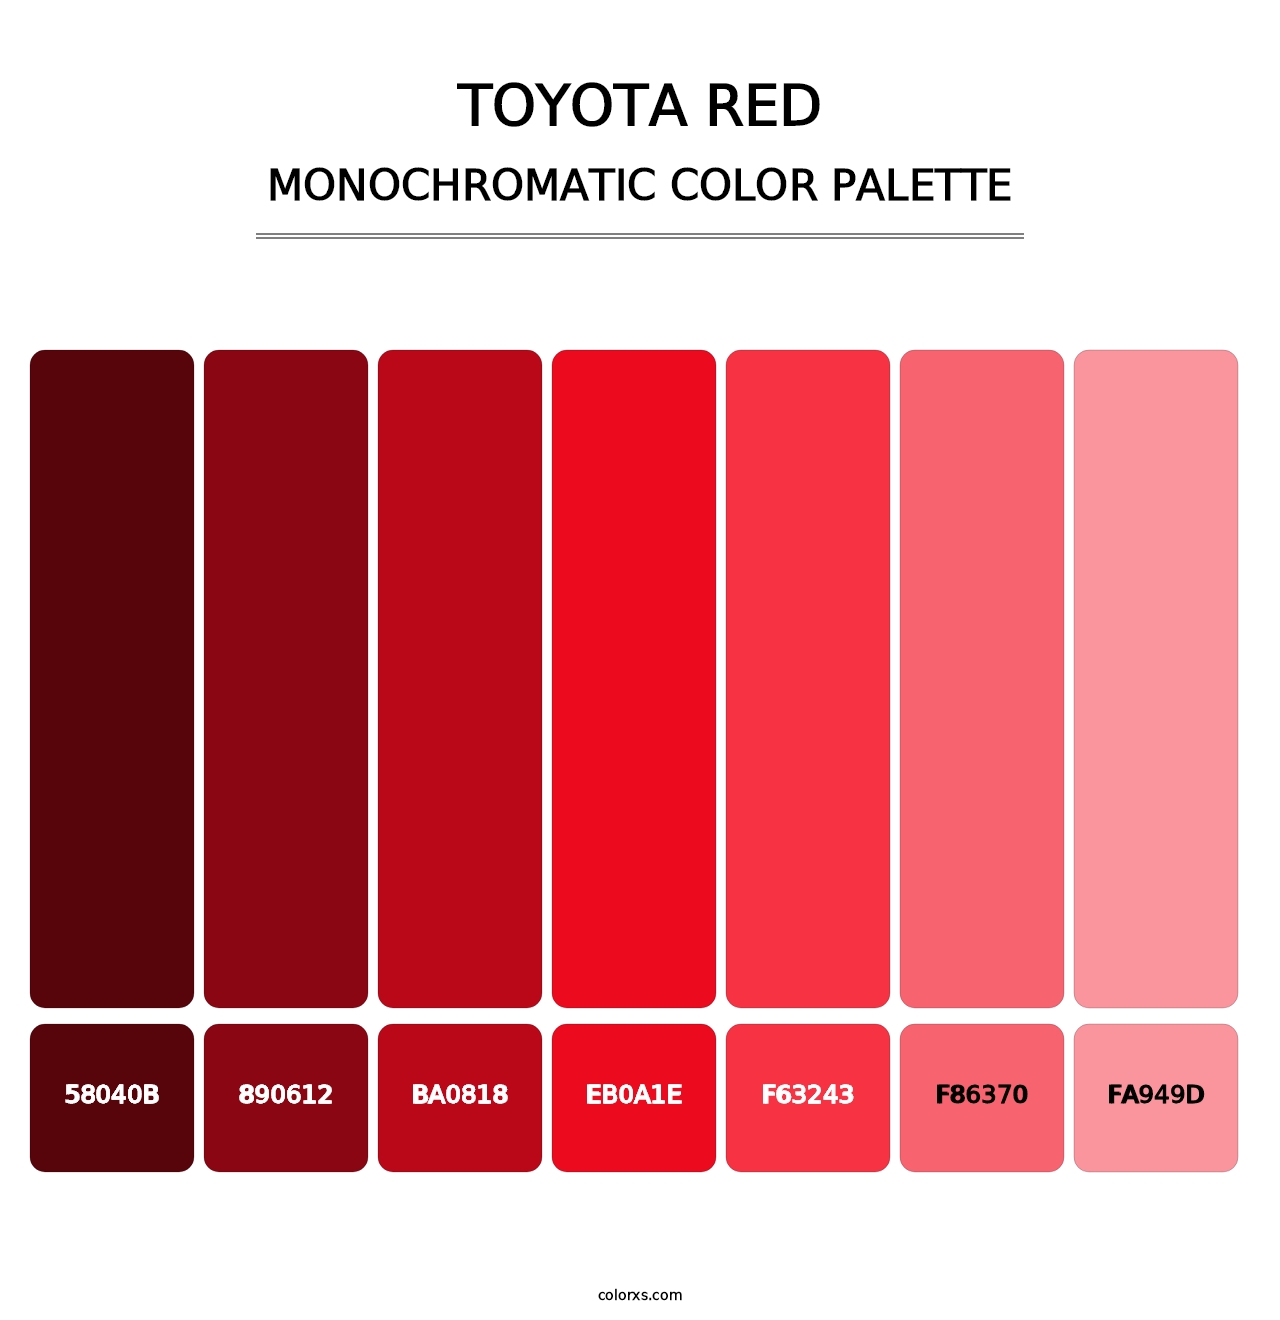 Toyota Red - Monochromatic Color Palette